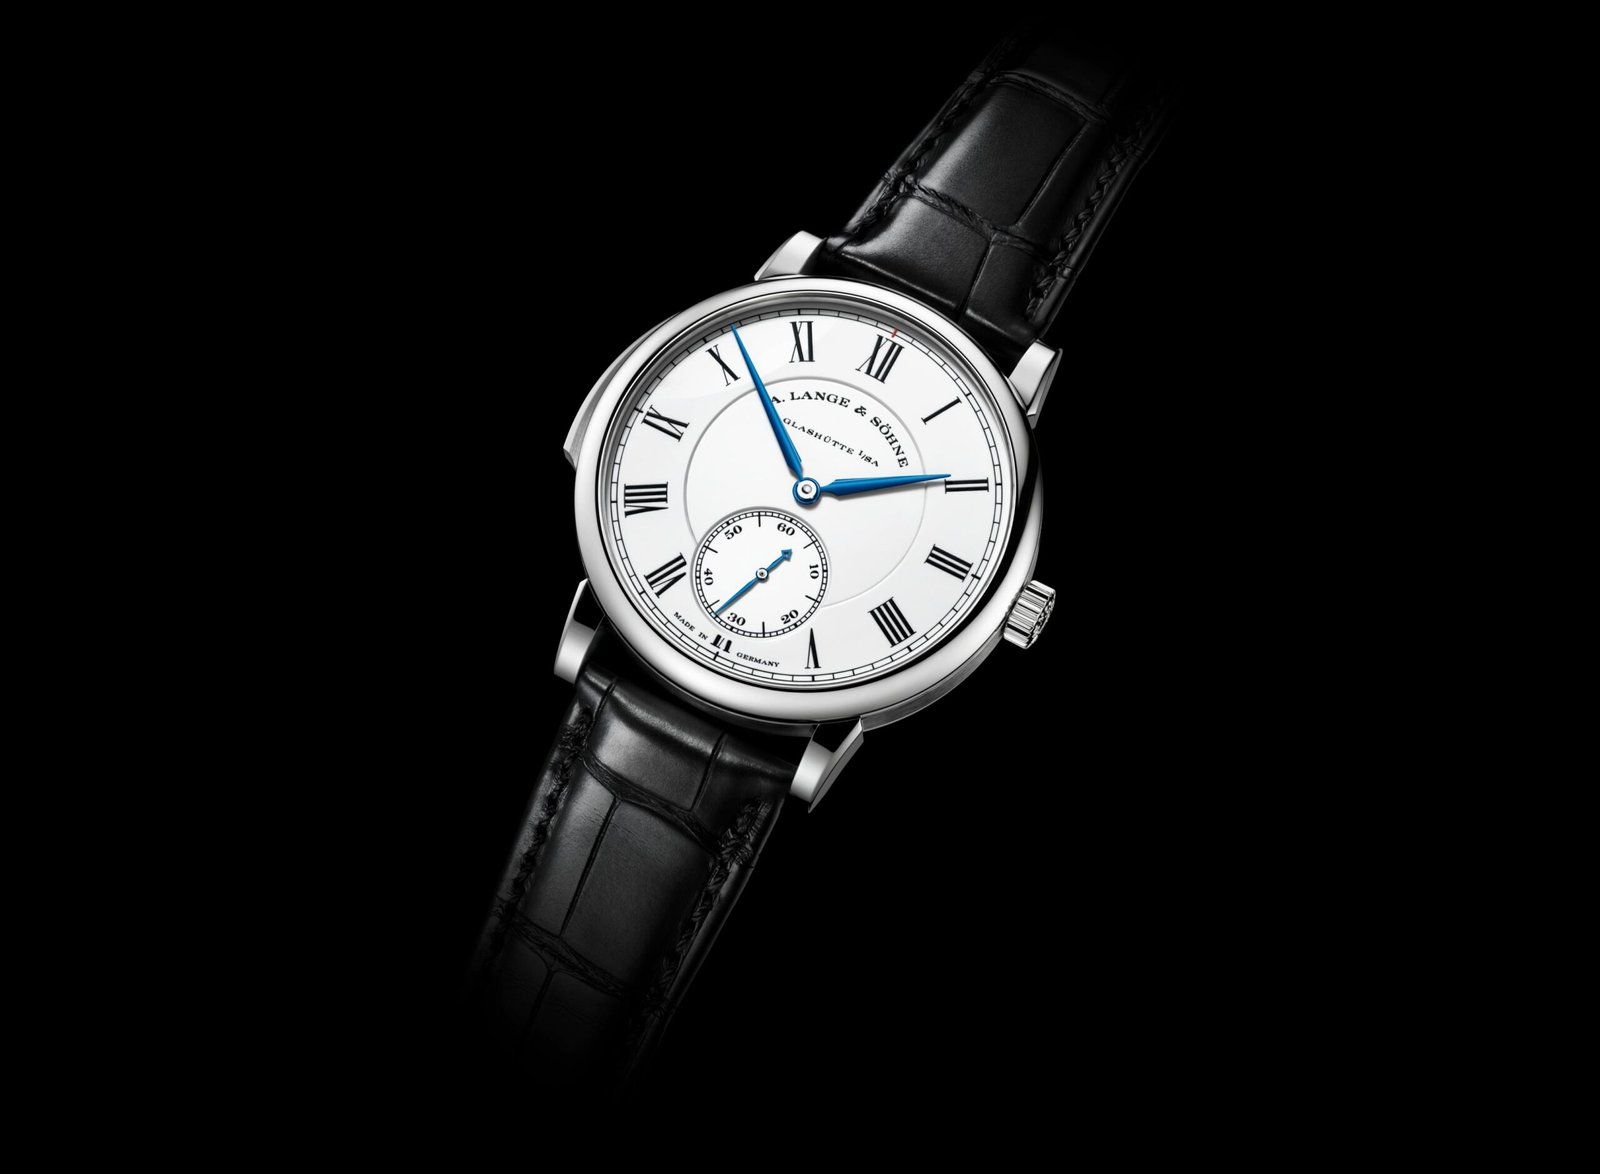 Watches and Wonders 2022: A. Lange & Sohne Exploring New Sound with the Richard Lange Minute Repeater